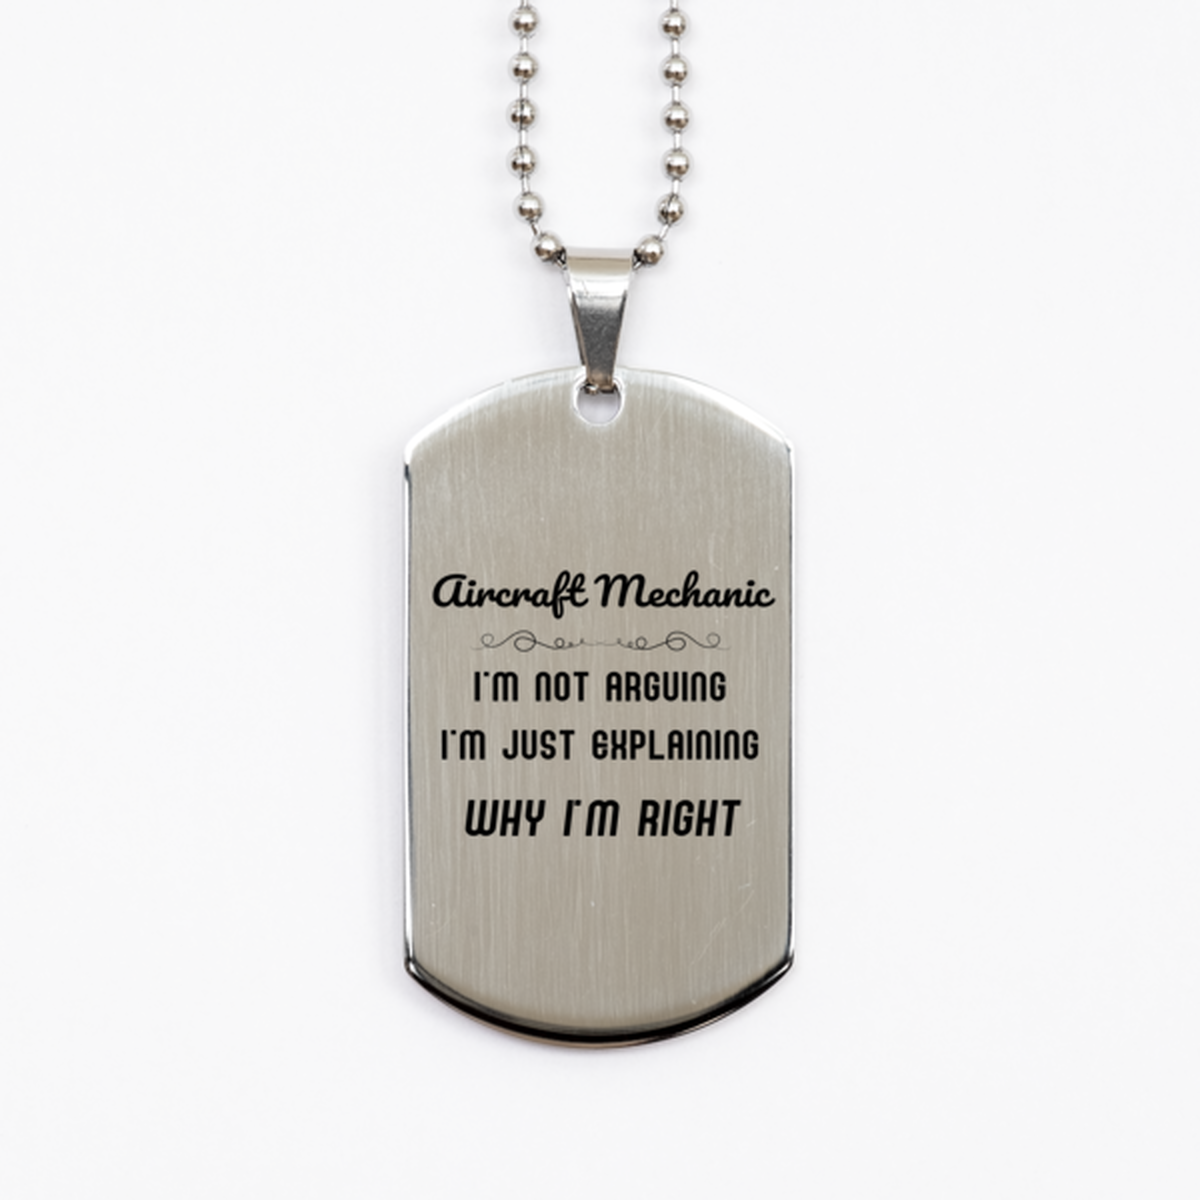 Aircraft Mechanic I'm not Arguing. I'm Just Explaining Why I'm RIGHT Silver Dog Tag, Funny Saying Quote Aircraft Mechanic Gifts For Aircraft Mechanic Graduation Birthday Christmas Gifts for Men Women Coworker